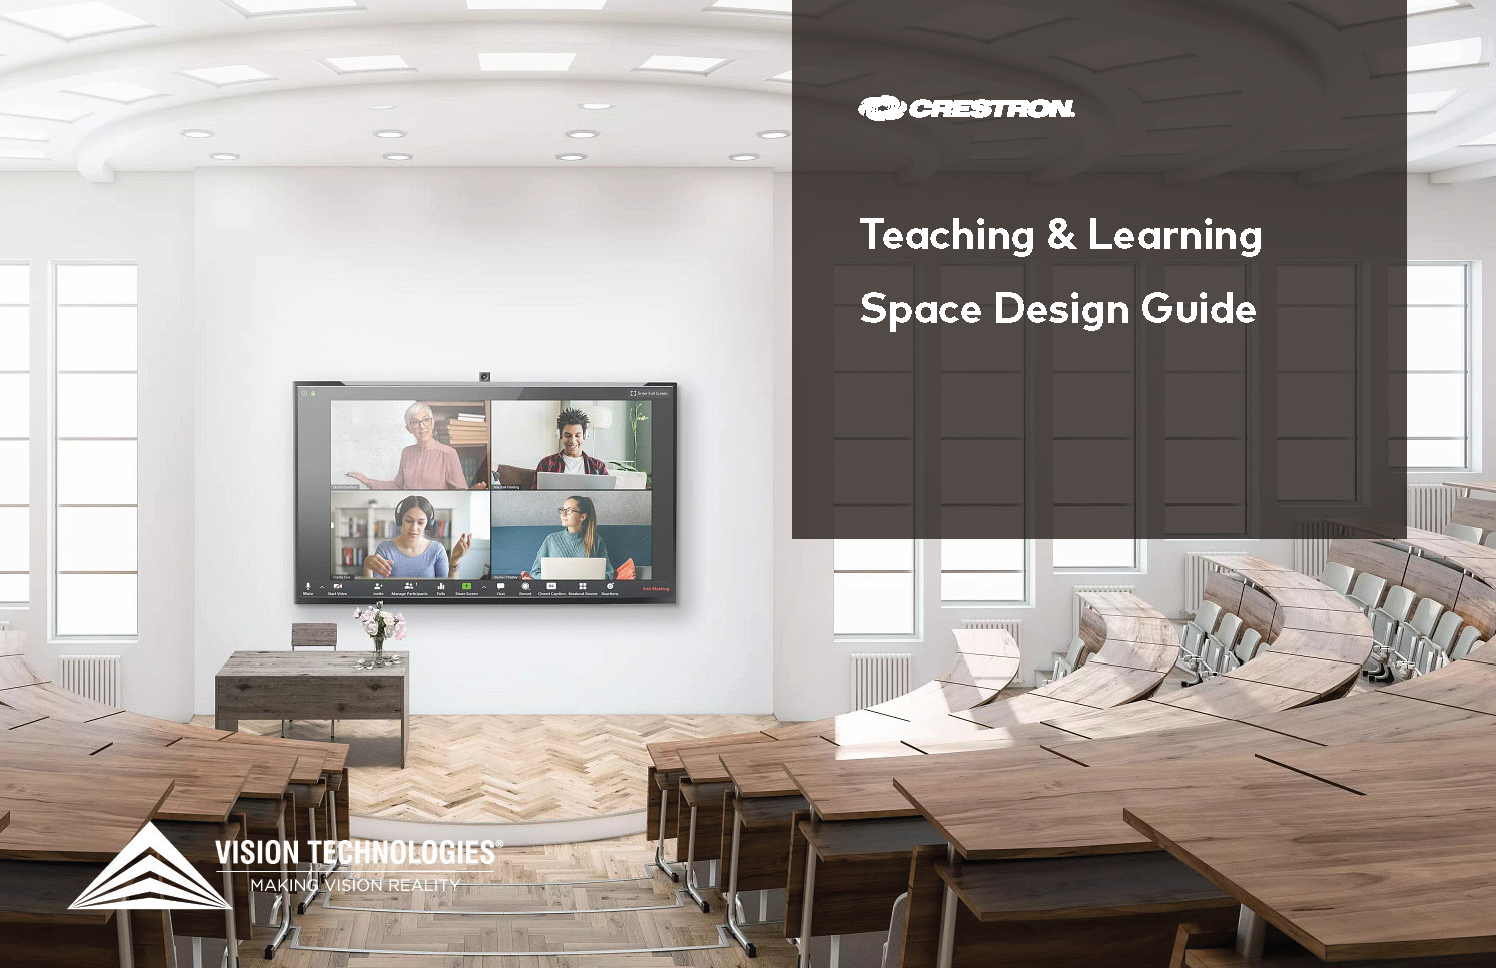 Crestron Vision Technologies teaching and learning space design guide